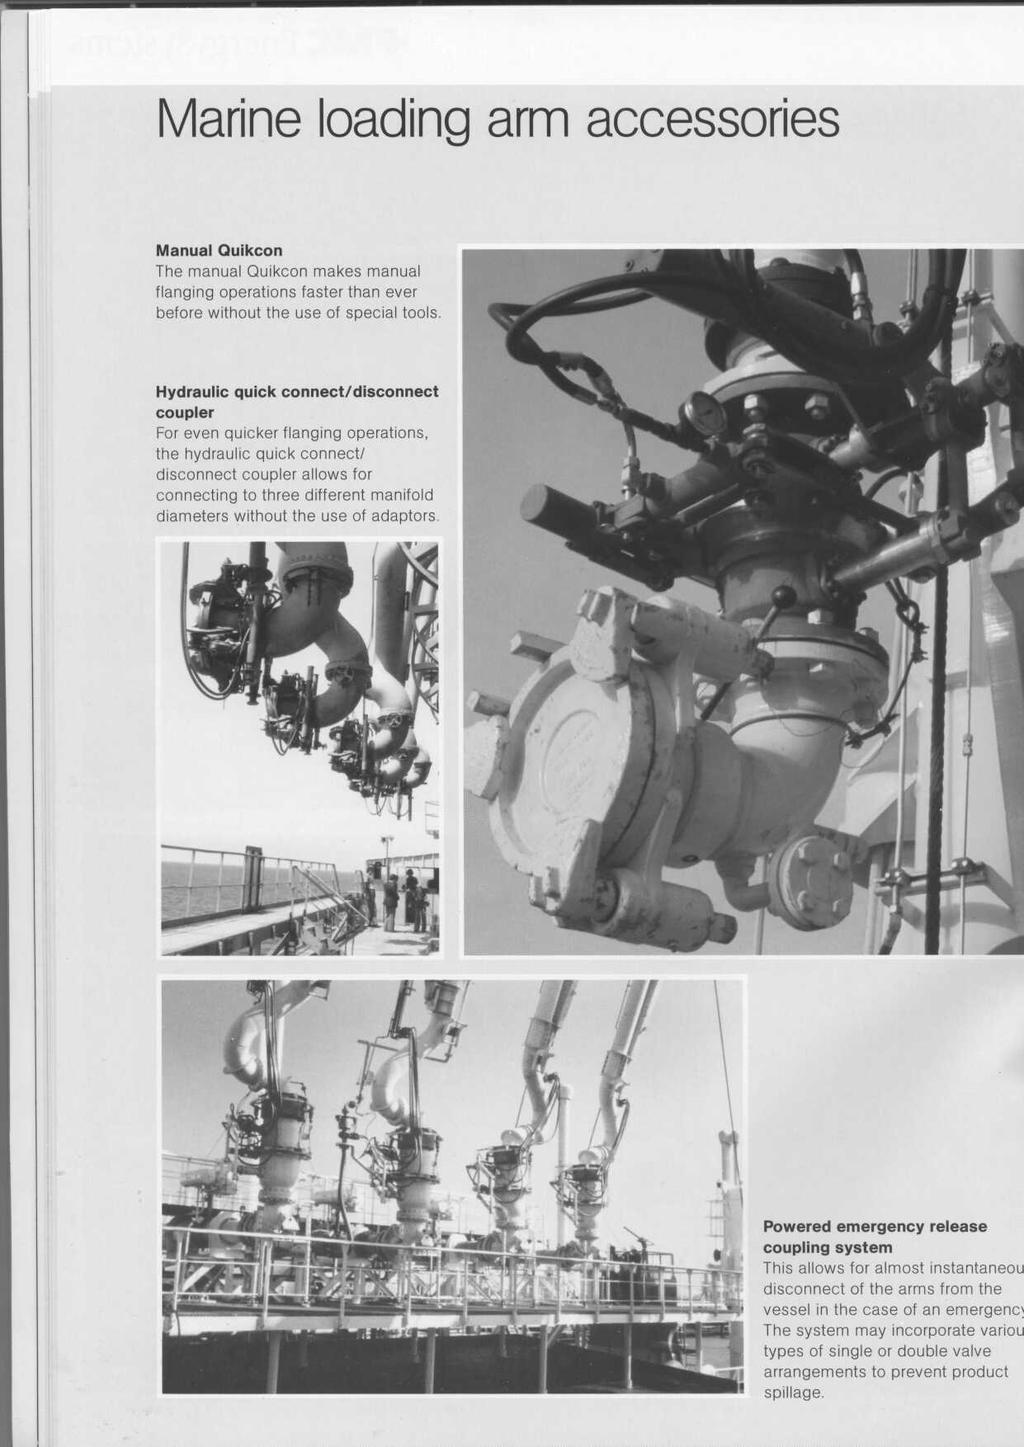 Marine loading arm accessories Manual Quikcon The manual Quikcon makes manual flanging operations faster than ever before without the use of special tools Hydraulic quick connect/disconnect coupler